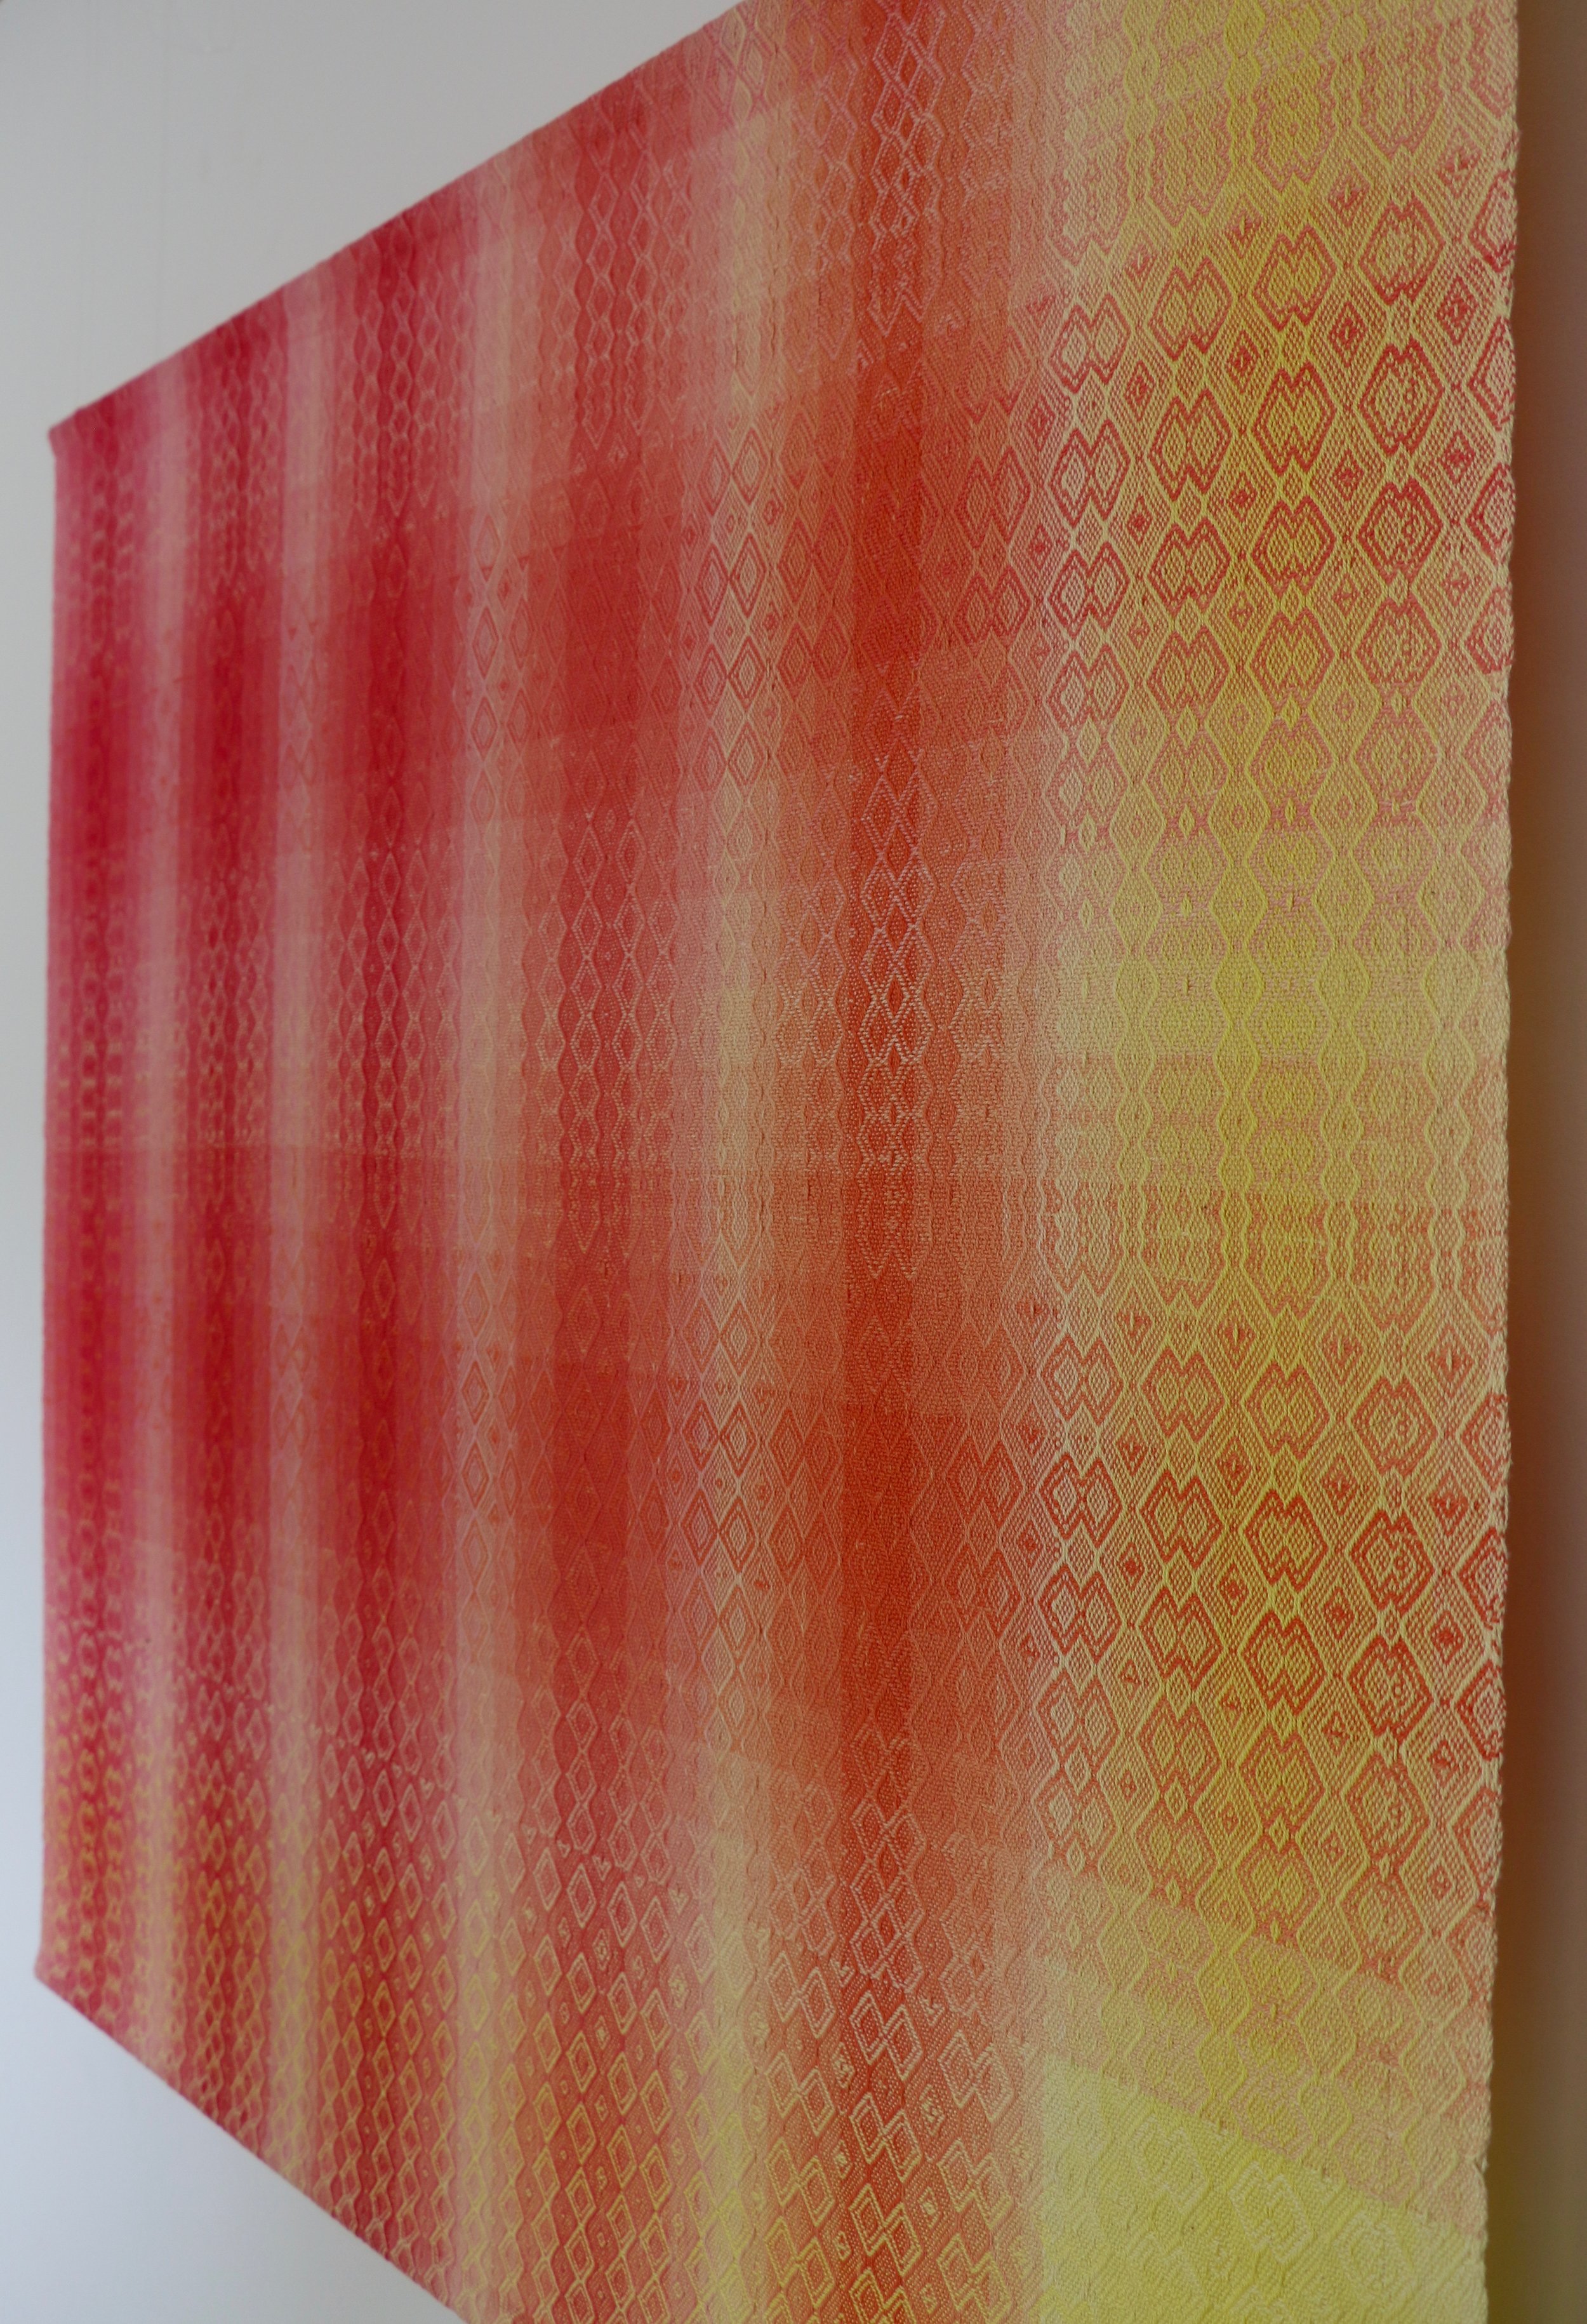  Title:  Shades of Pink, Orange and Yellow Hand Woven Panel   Size: 38” wide x 39” long  Medium: Hand-painted, hand-woven  Materials: cotton  2007  For process information and pricing, please contact us by clicking on this  link .    